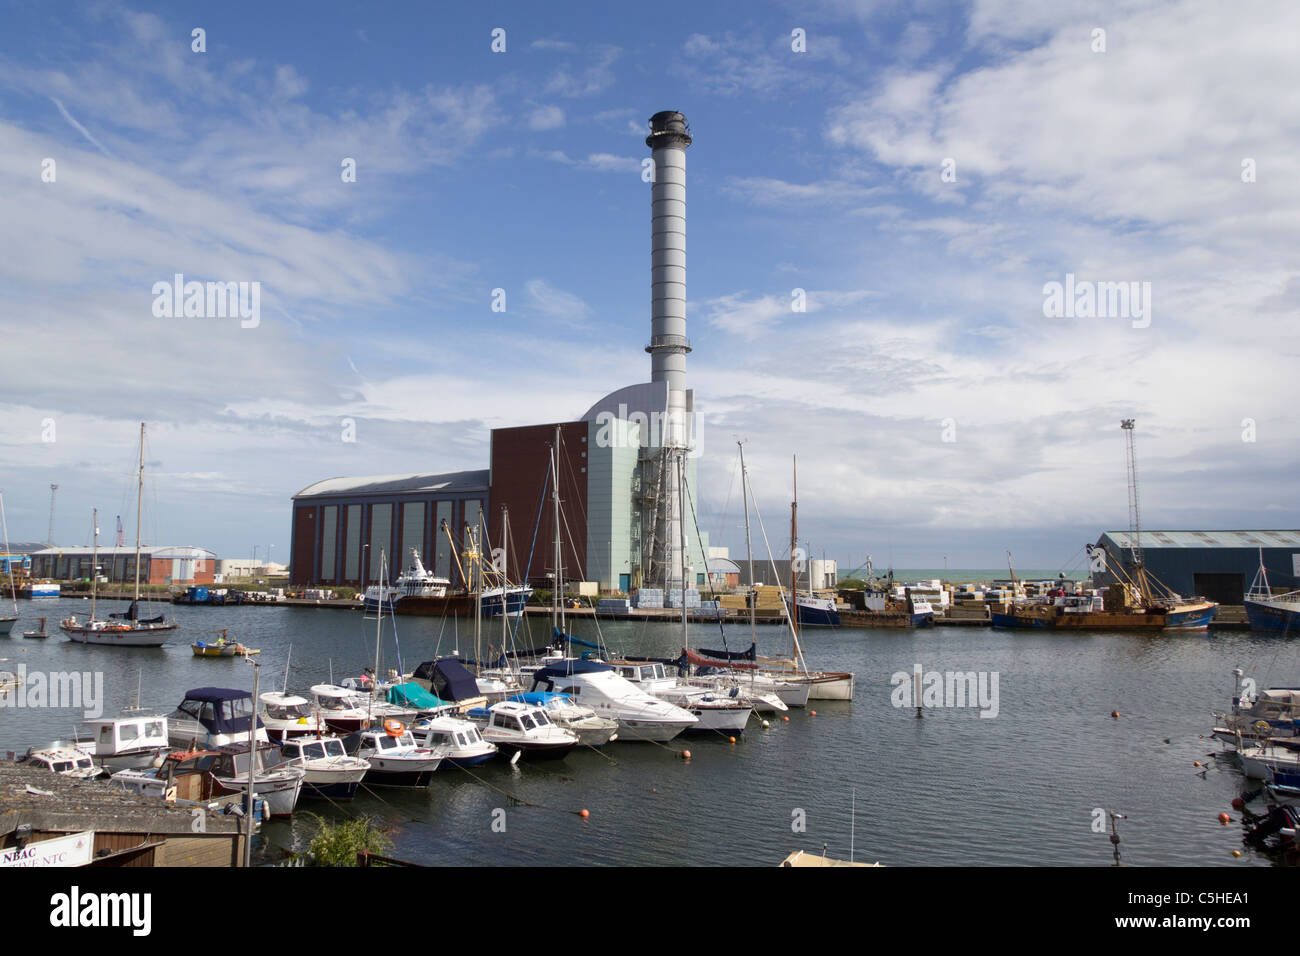 Shoreham Power Station with the Lady Bee Marina in the foreground Stock Photo